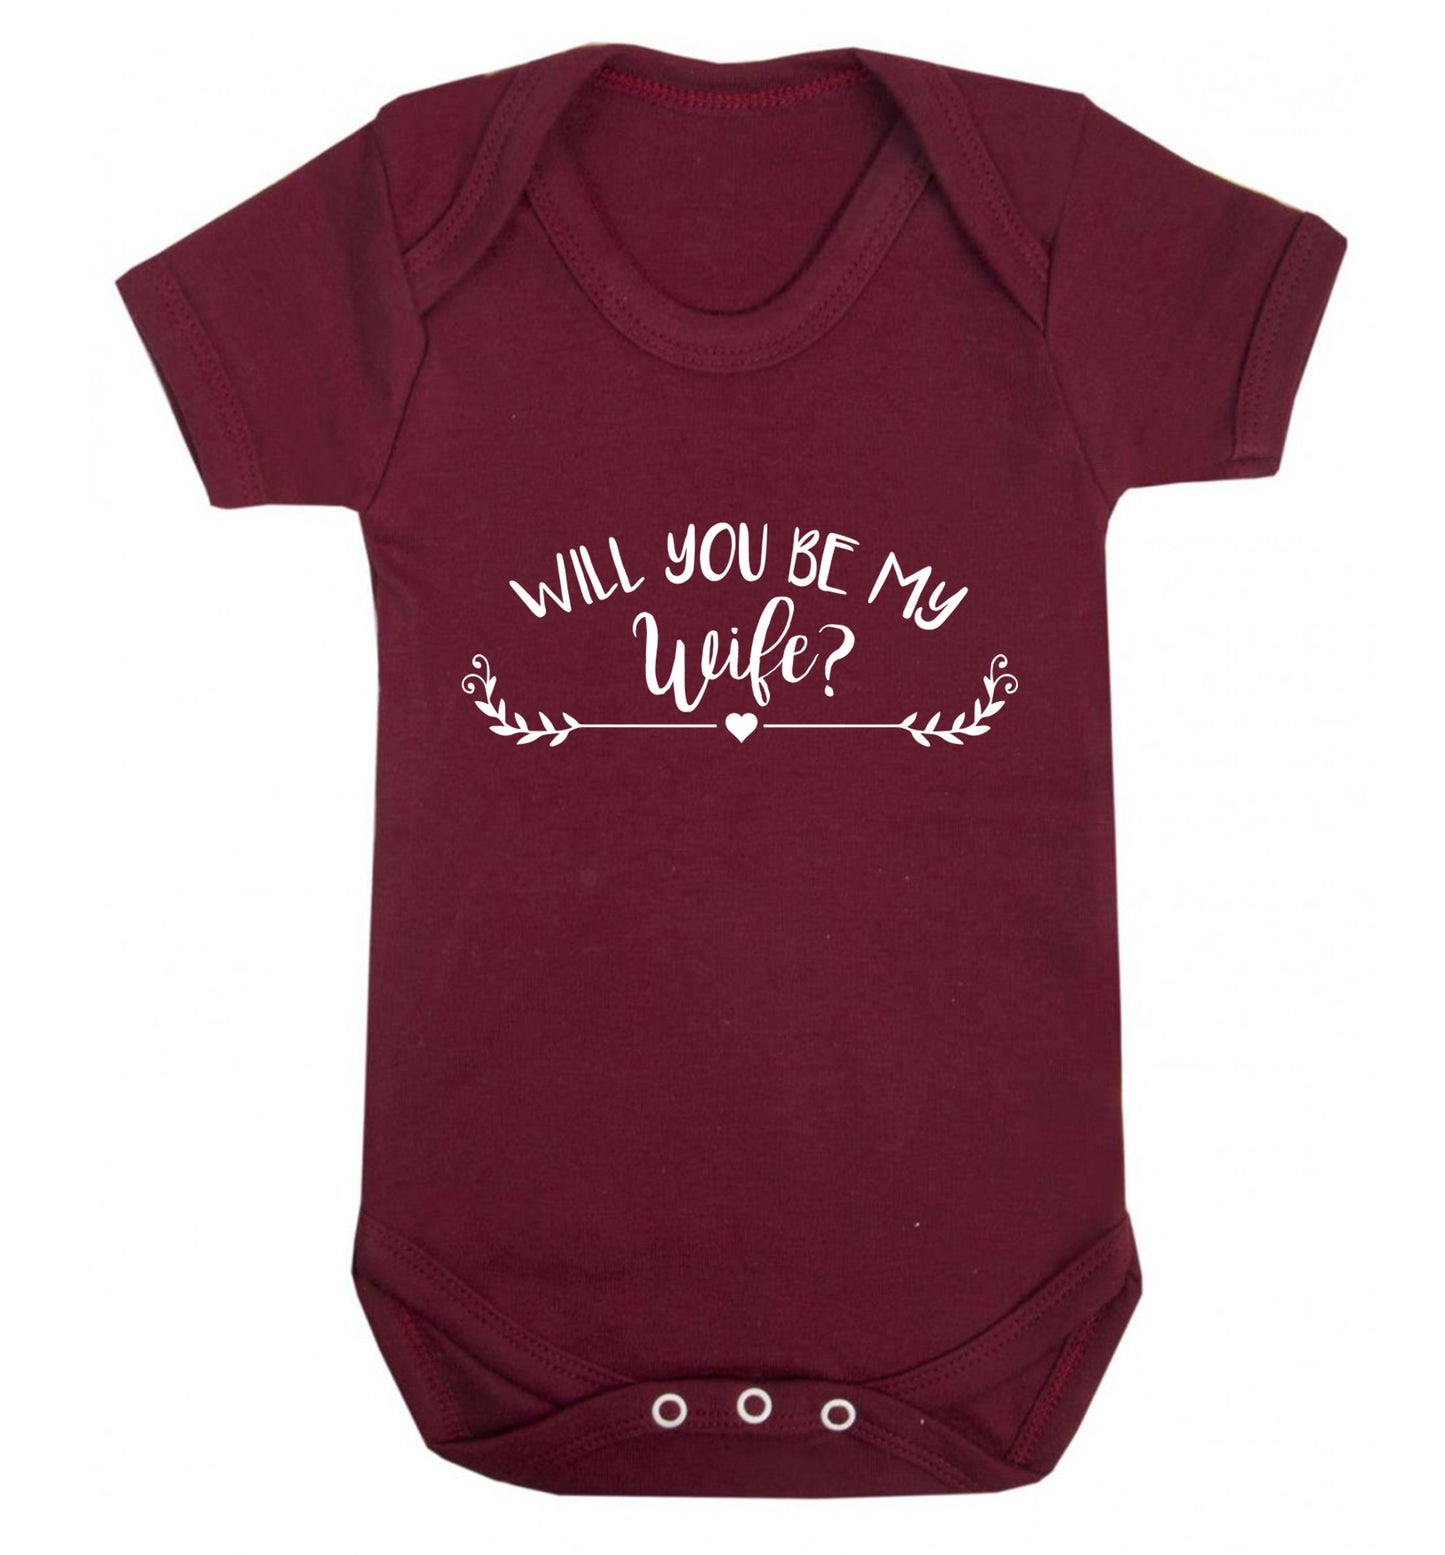 Will you be my wife? Baby Vest maroon 18-24 months